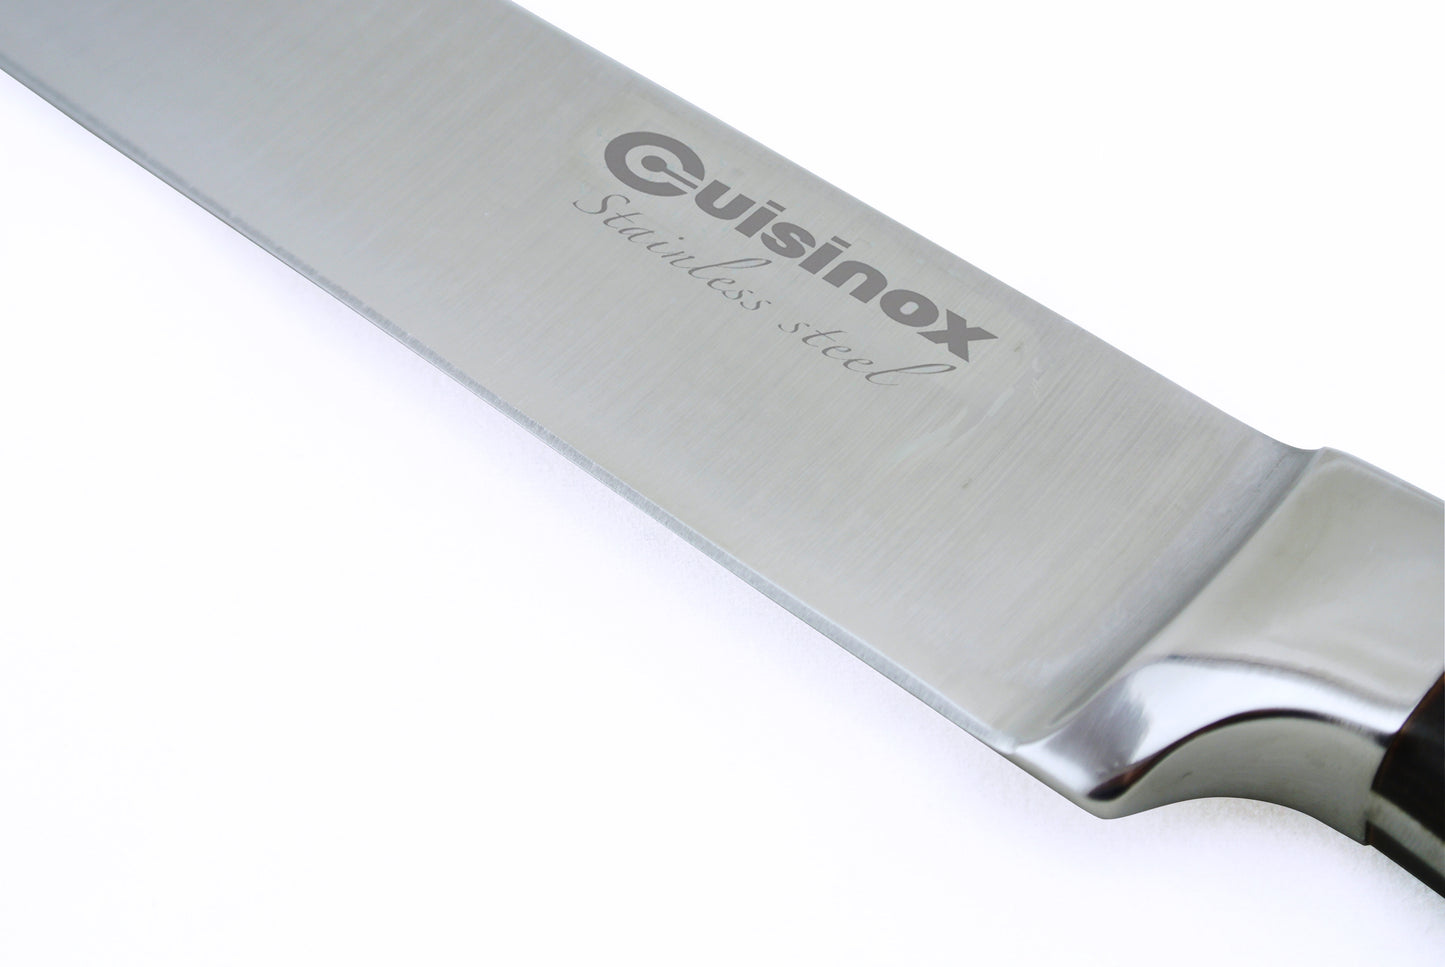 Cuisinox Deluxe Carving Knife